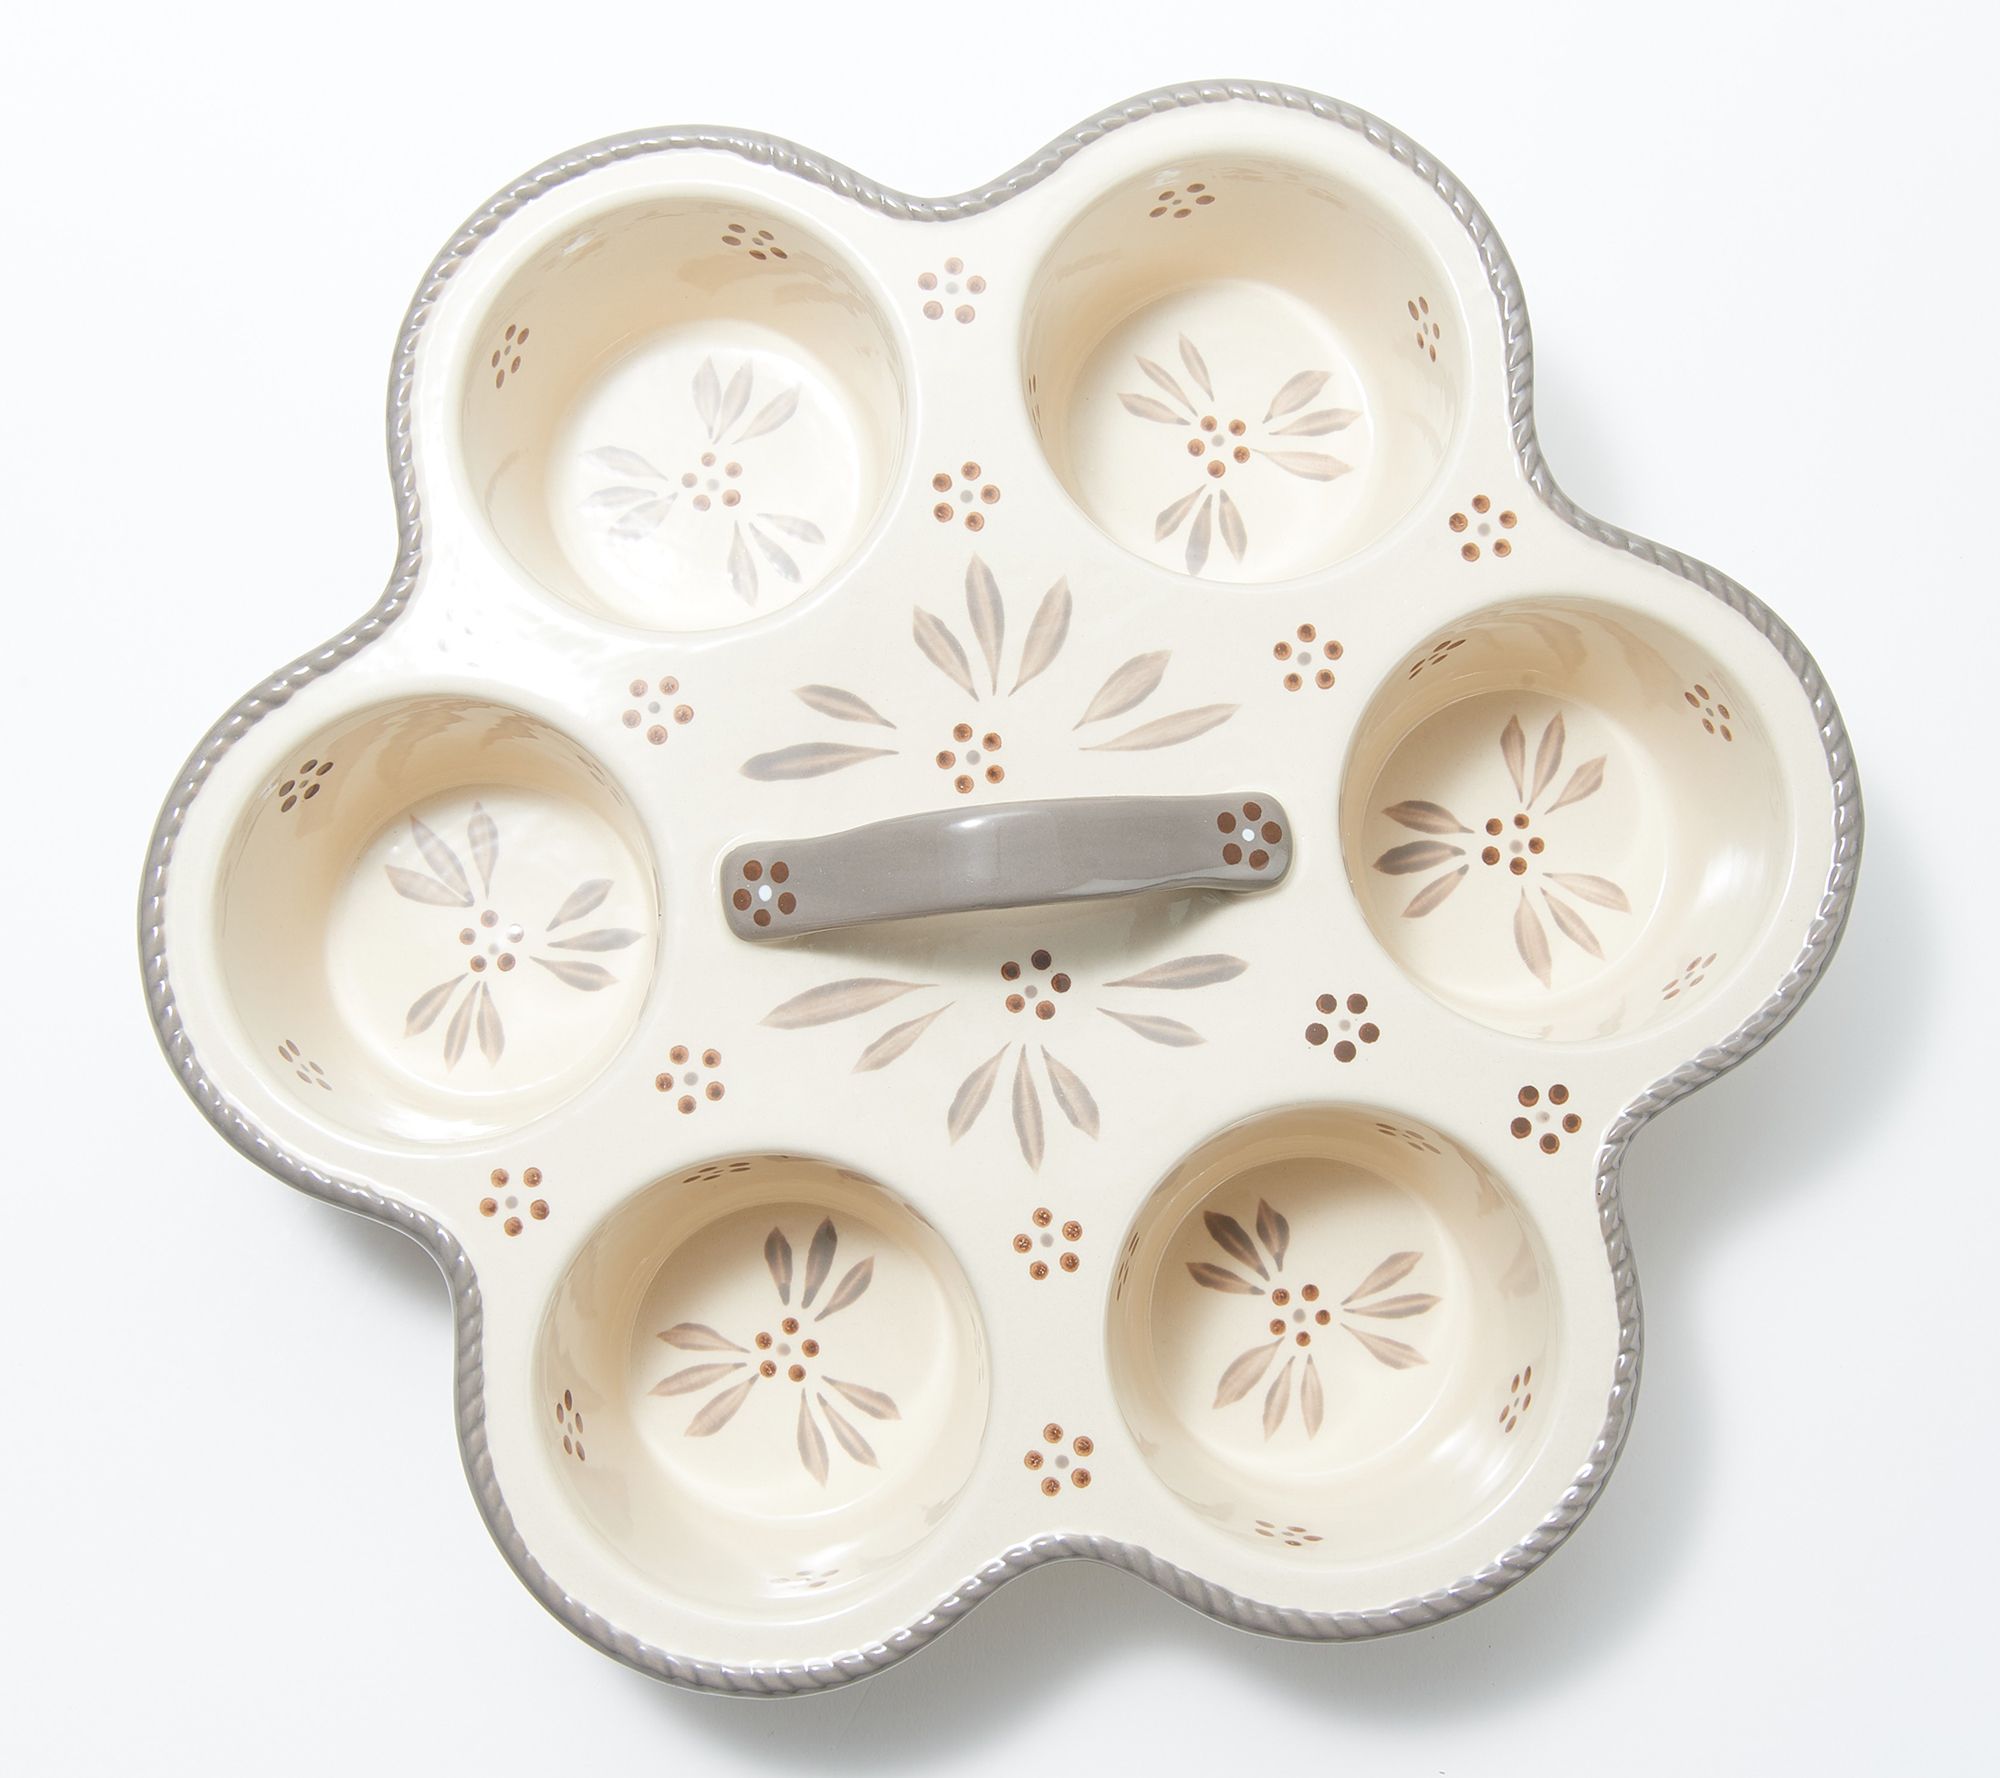 Temp-tations 6-Cup Texas Muffin Pan with Handle on QVC 